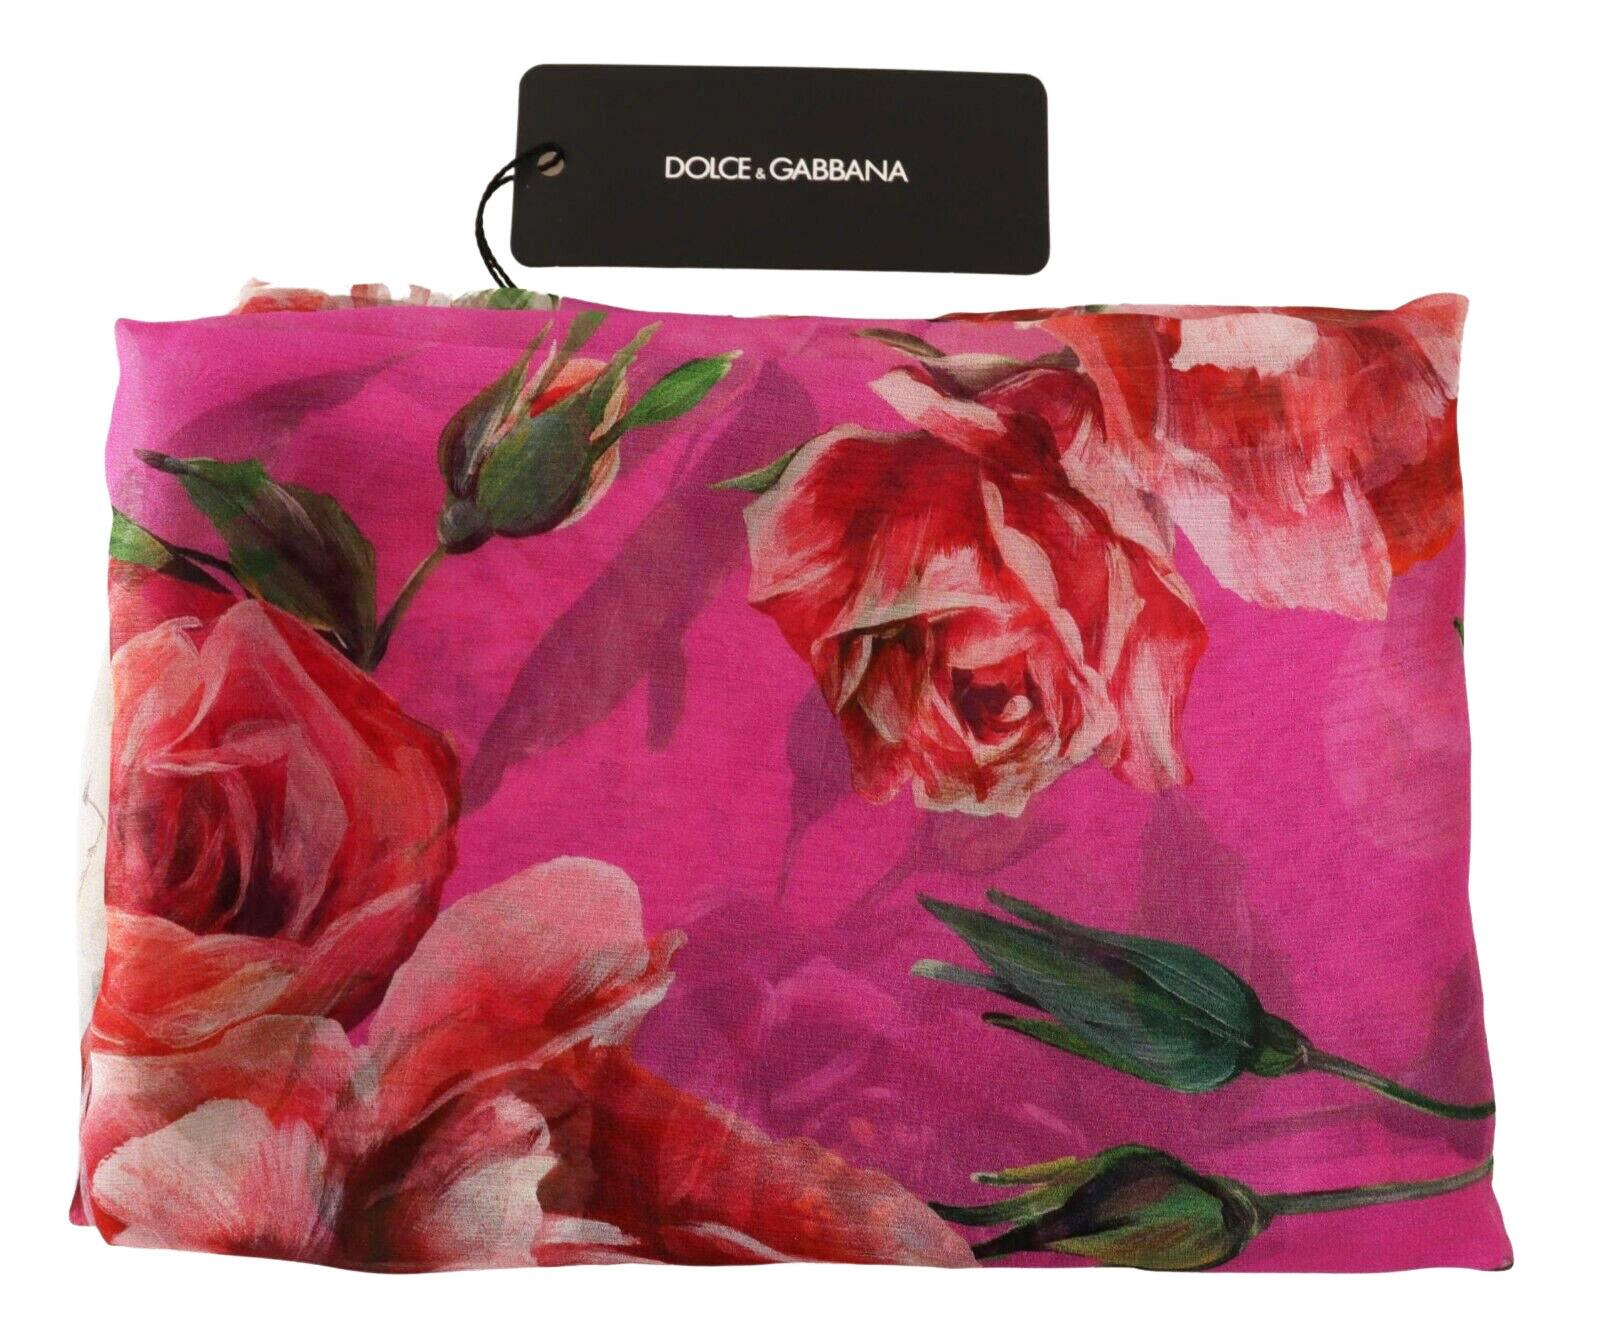 Dolce & Gabbana Pink Red Silk Peony Roses Scarf Wrap Cover Up Floral Flowers 7